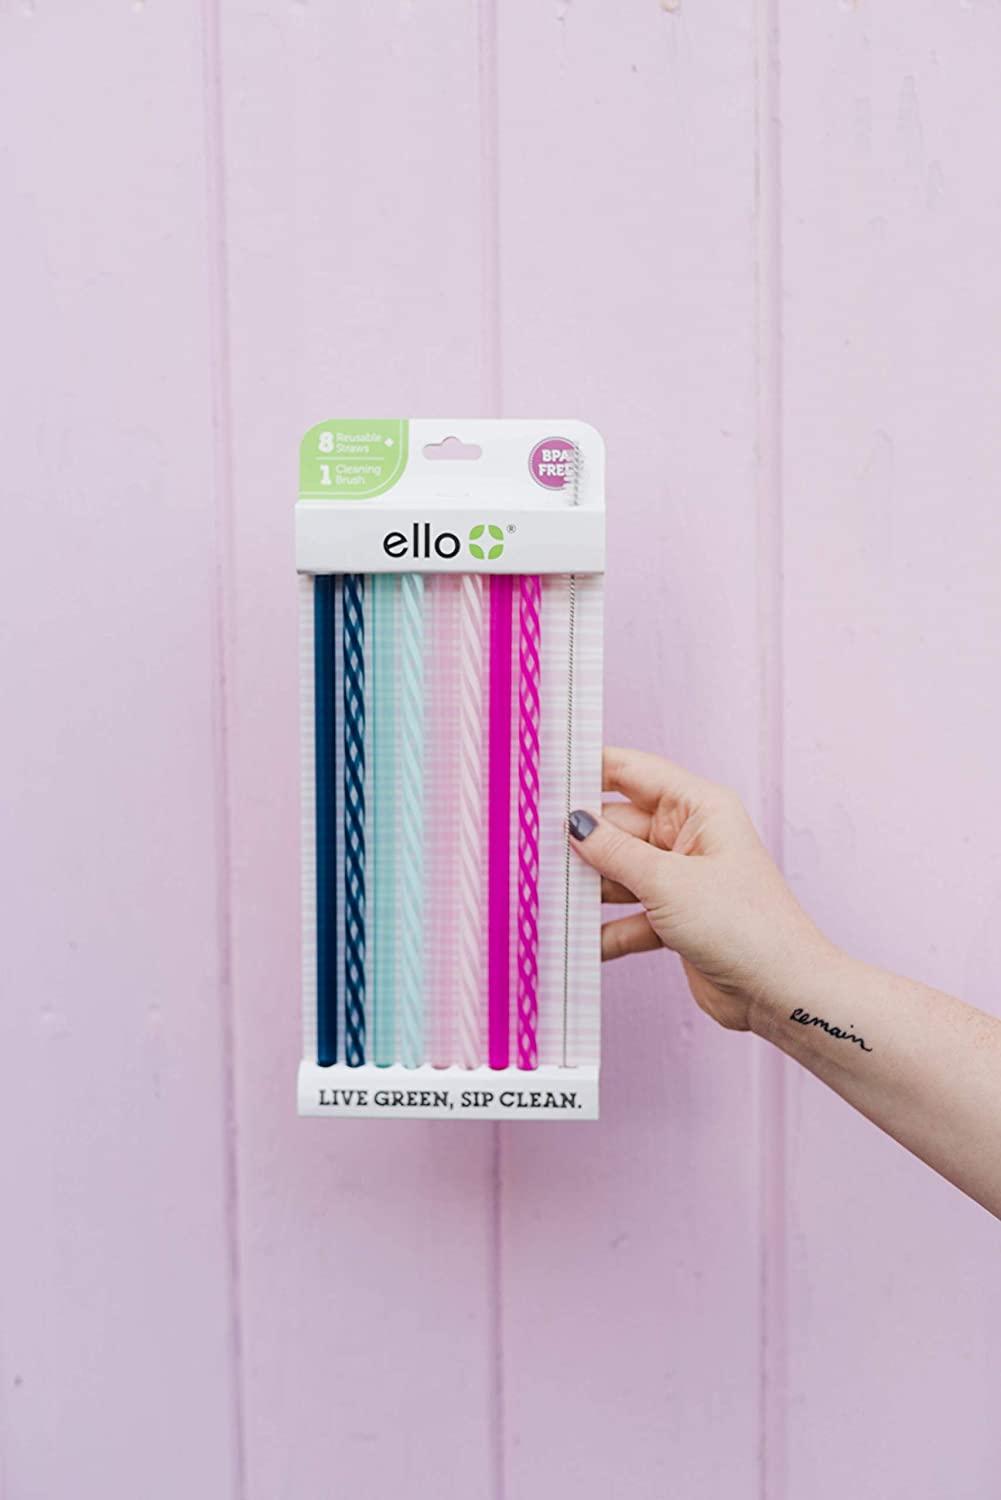 Ello Impact BPA-Free Plastic Reusable Straws with Cleaning Brush, 8 Piece  Multi-Pack, Rosewater